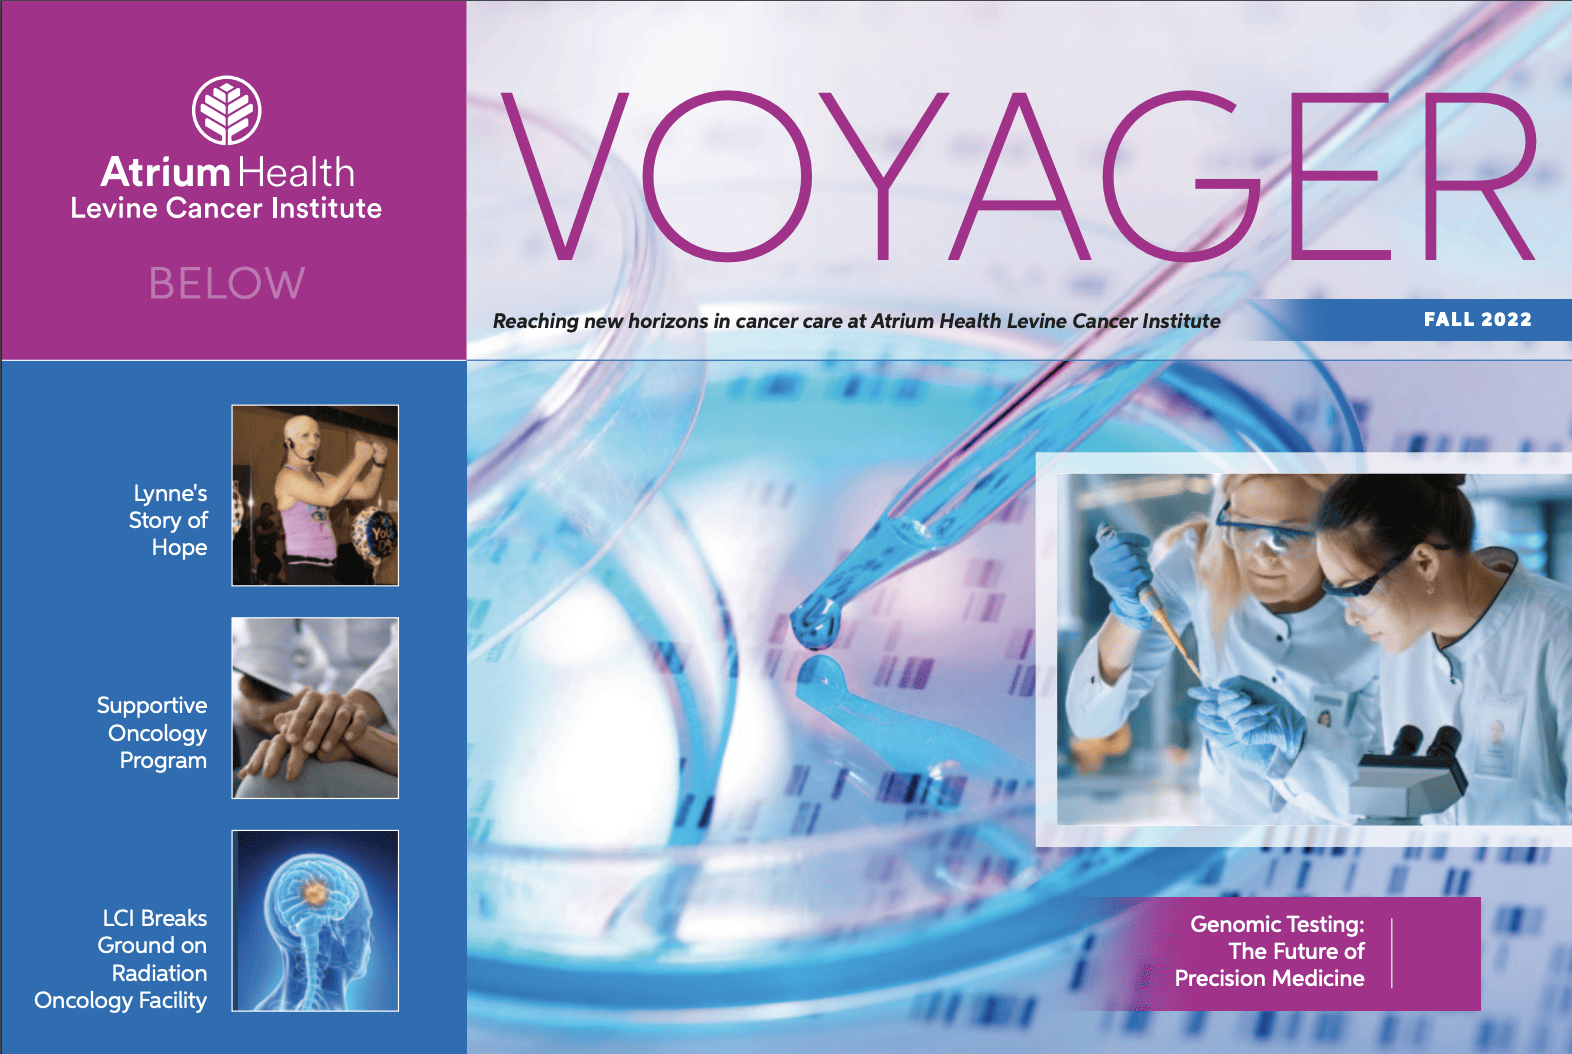 Voyager e version cover image